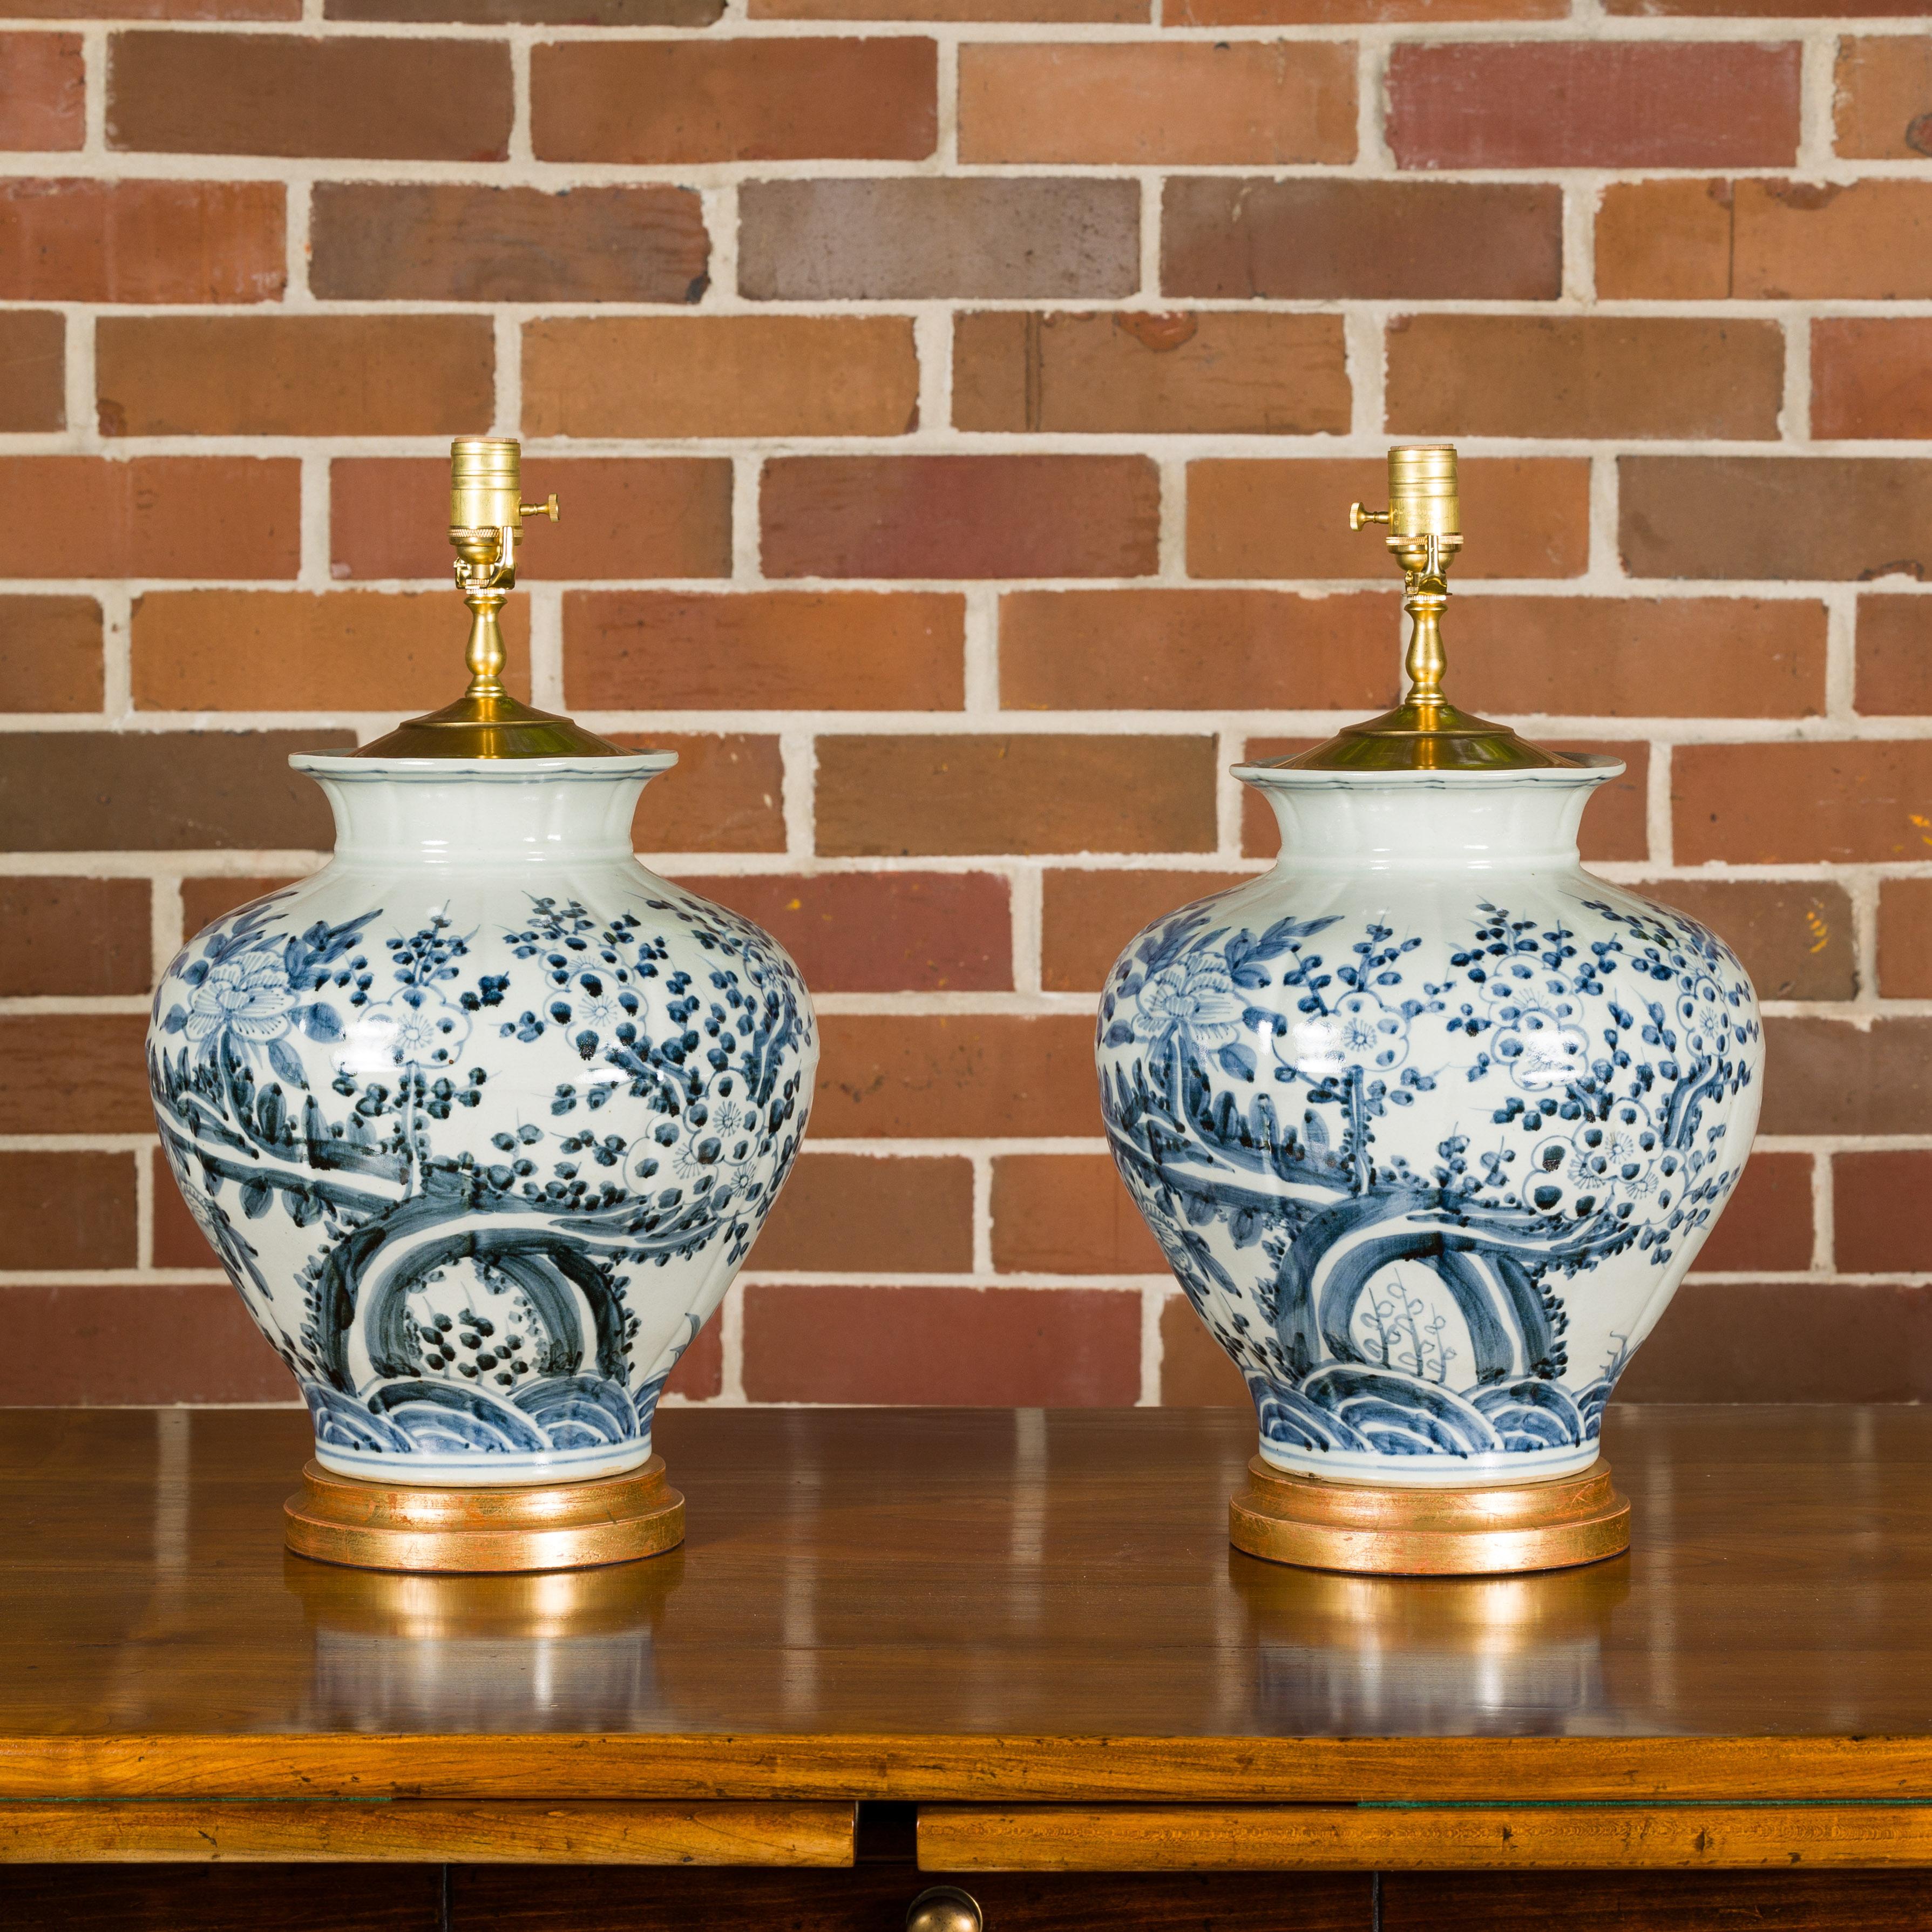 A pair of Asian blue and white porcelain vases with blooming tree and flying birds décor made into single light table lamps, wired for the USA and mounted on circular giltwood bases. Behold this exquisite pair of Asian blue and white porcelain